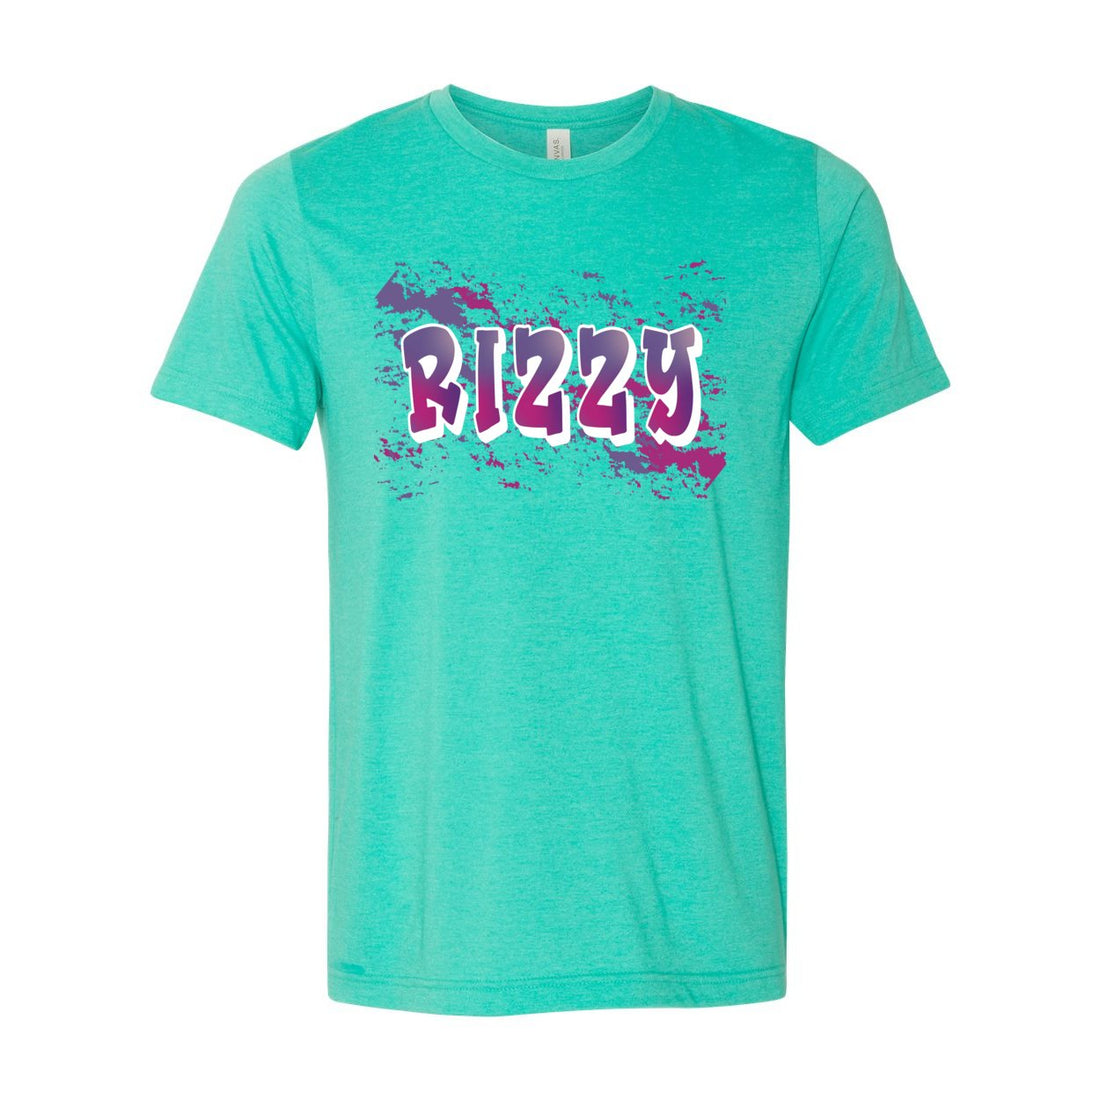 Rizzy Short Sleeve Jersey Tee - T-Shirts - Positively Sassy - Rizzy Short Sleeve Jersey Tee